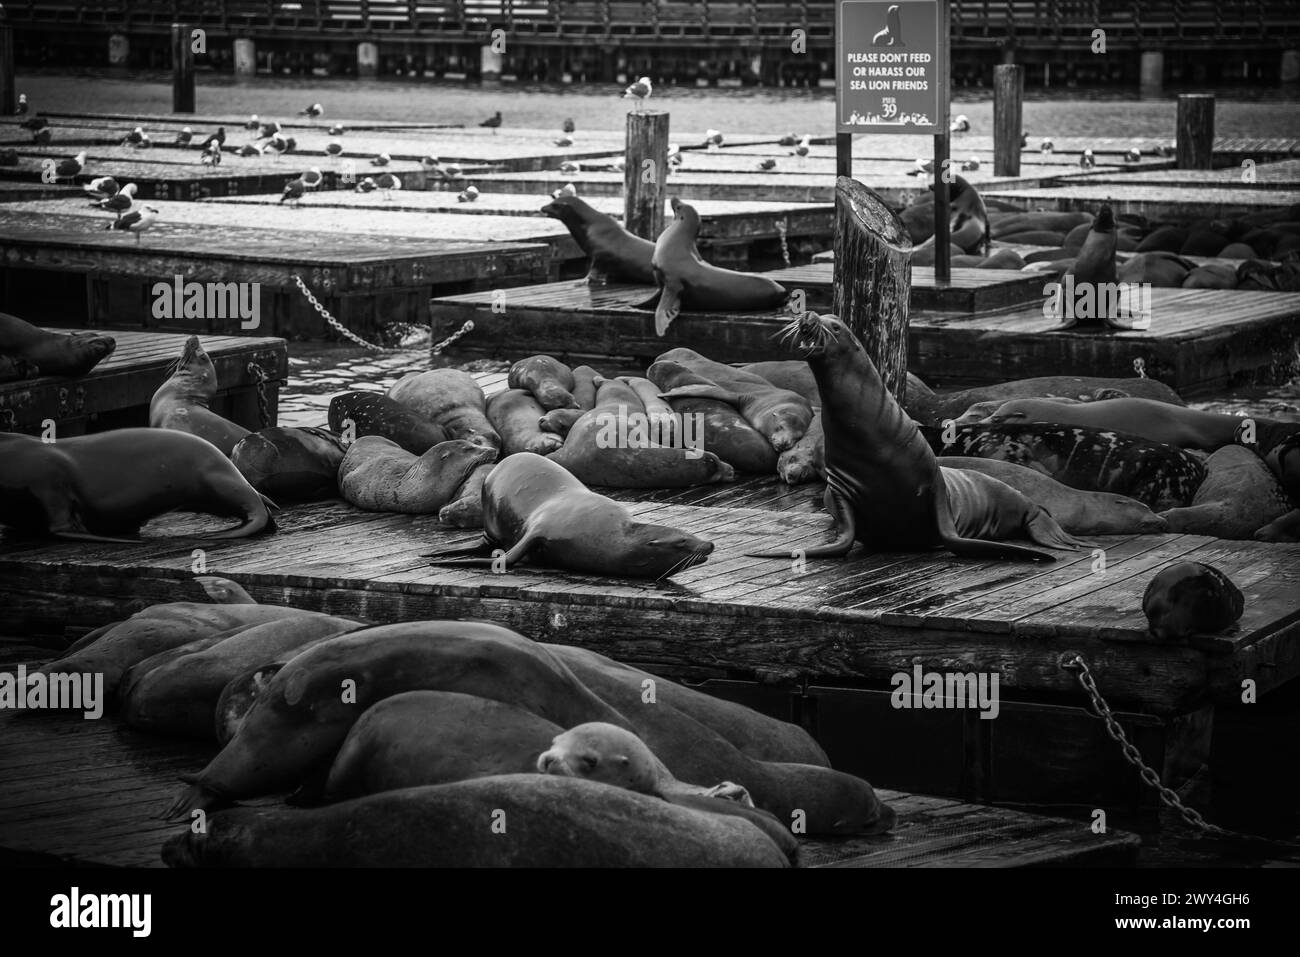 The Sea Lions of Pier 39 in Monochrome - Fisherman's Wharf, San Francisco, Californie Banque D'Images